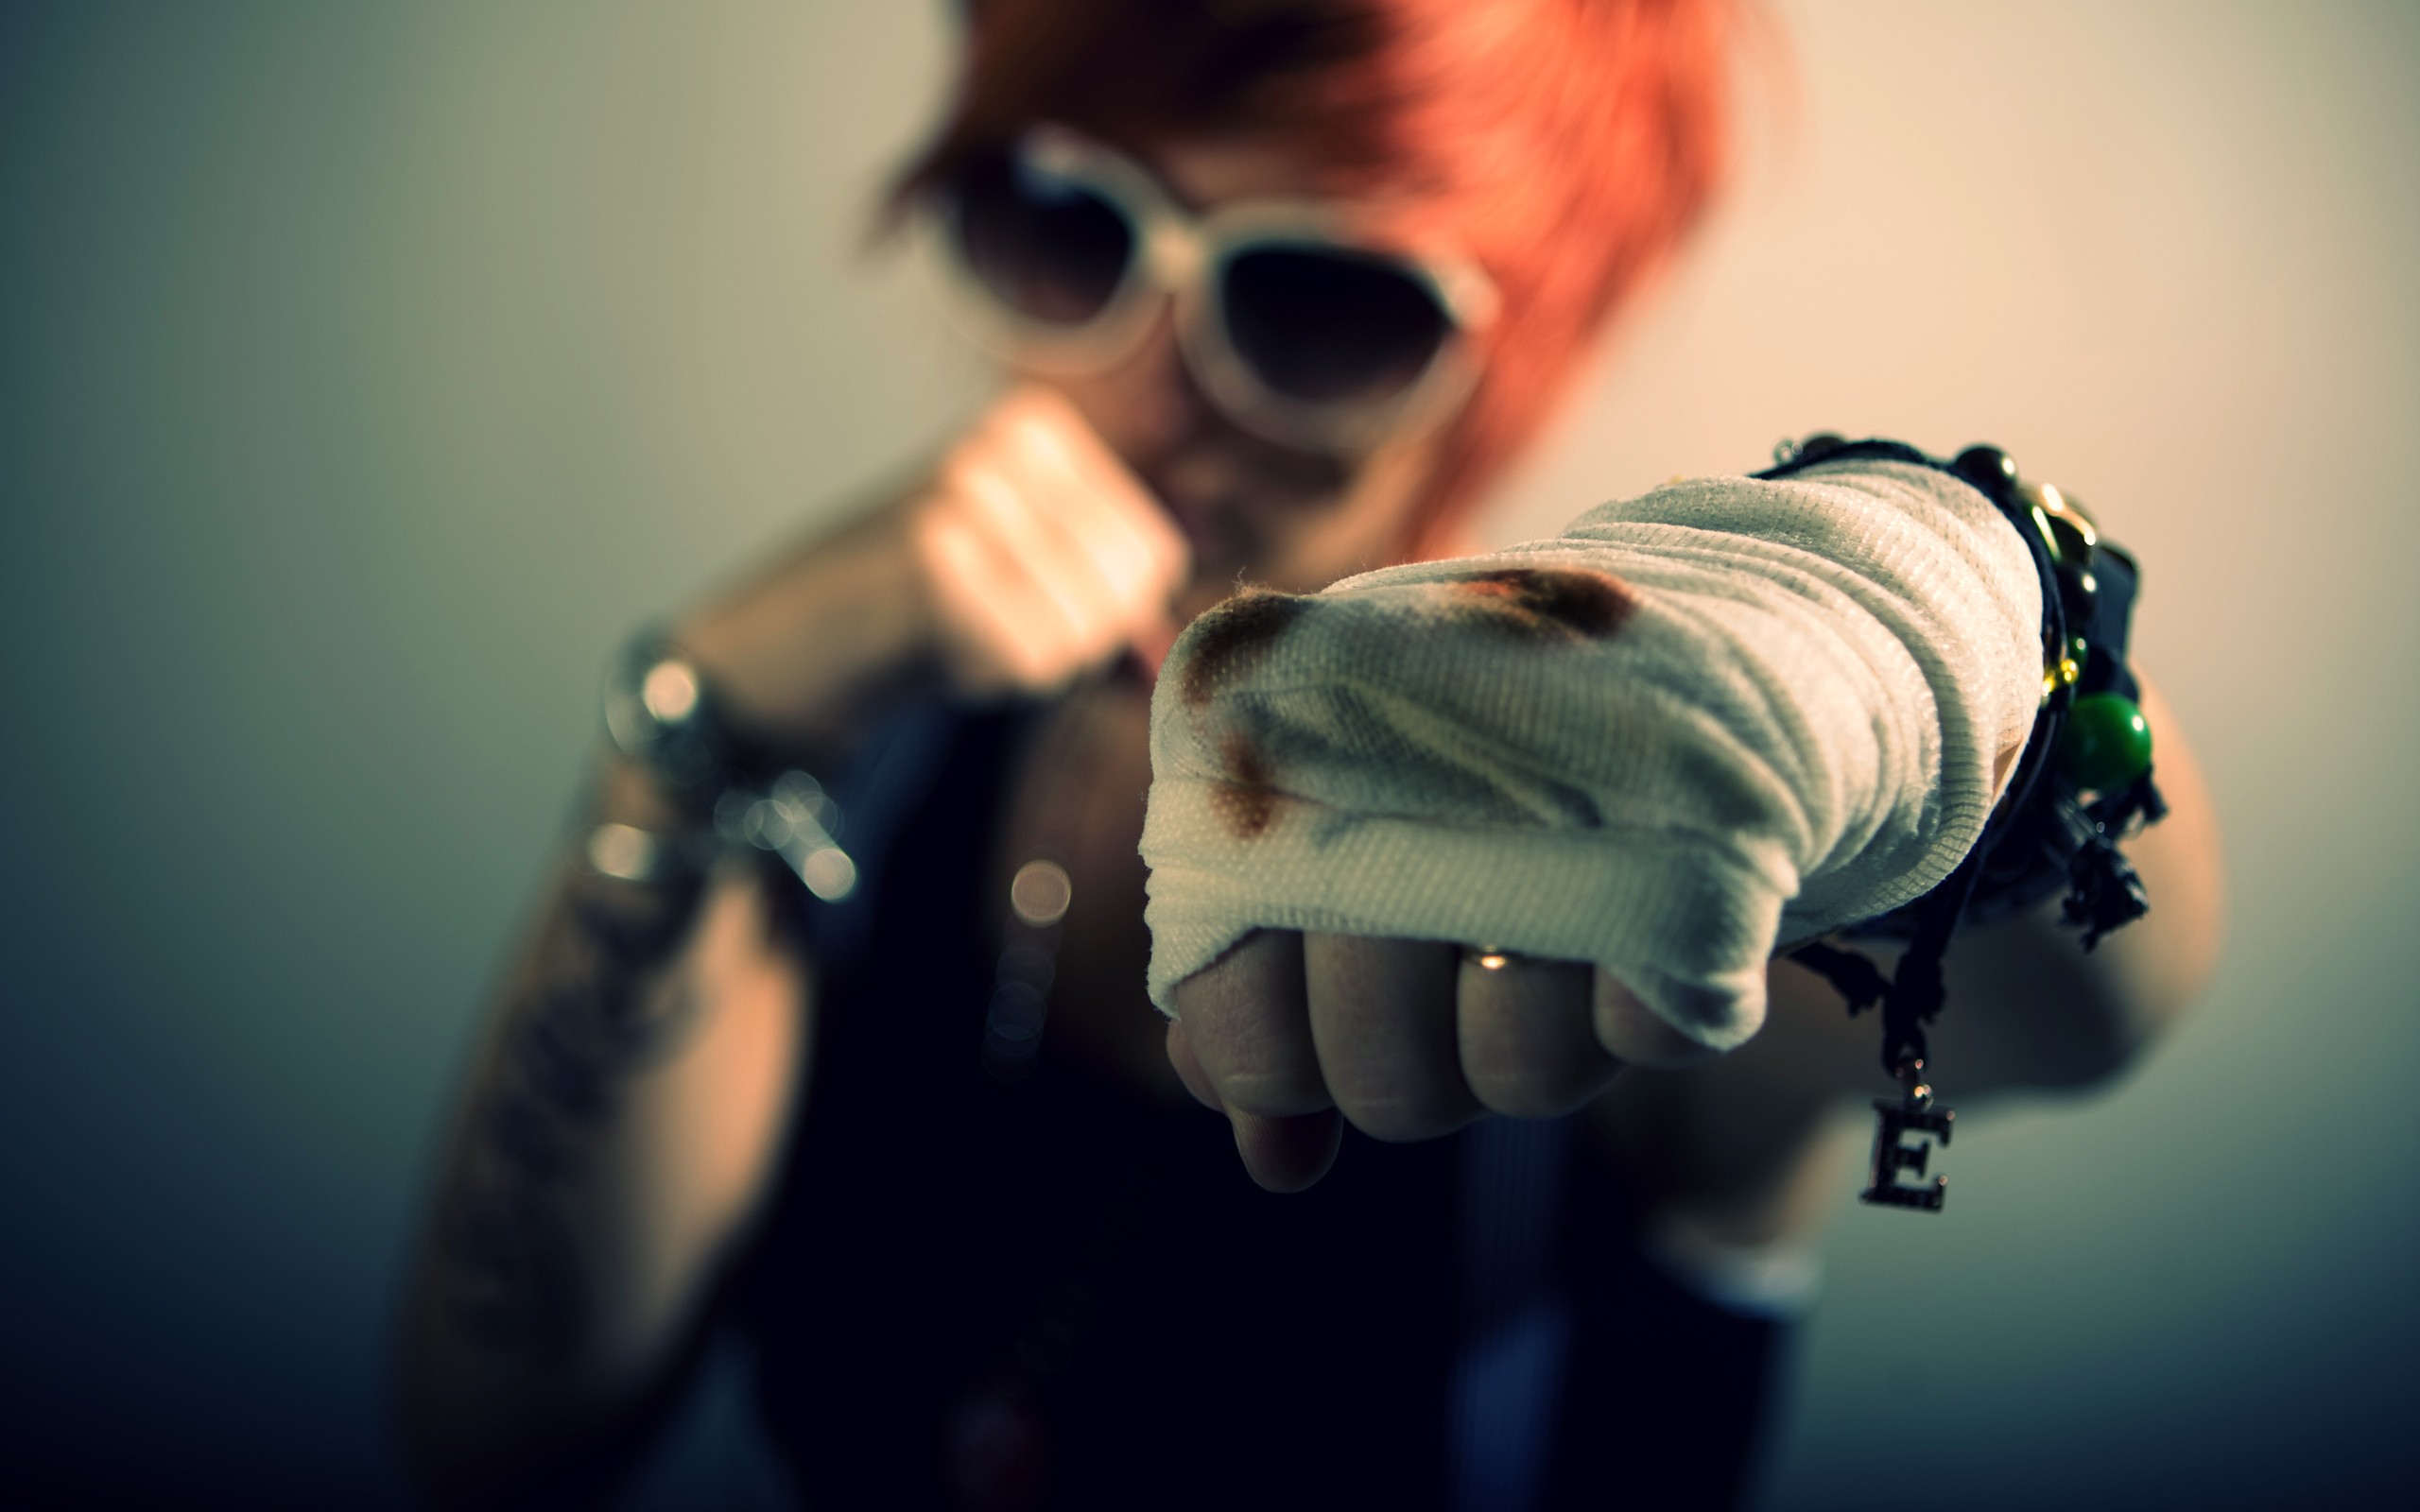 People 2560x1600 redhead women boxing women with glasses sunglasses bracelets depth of field fist frontal view simple background cropped